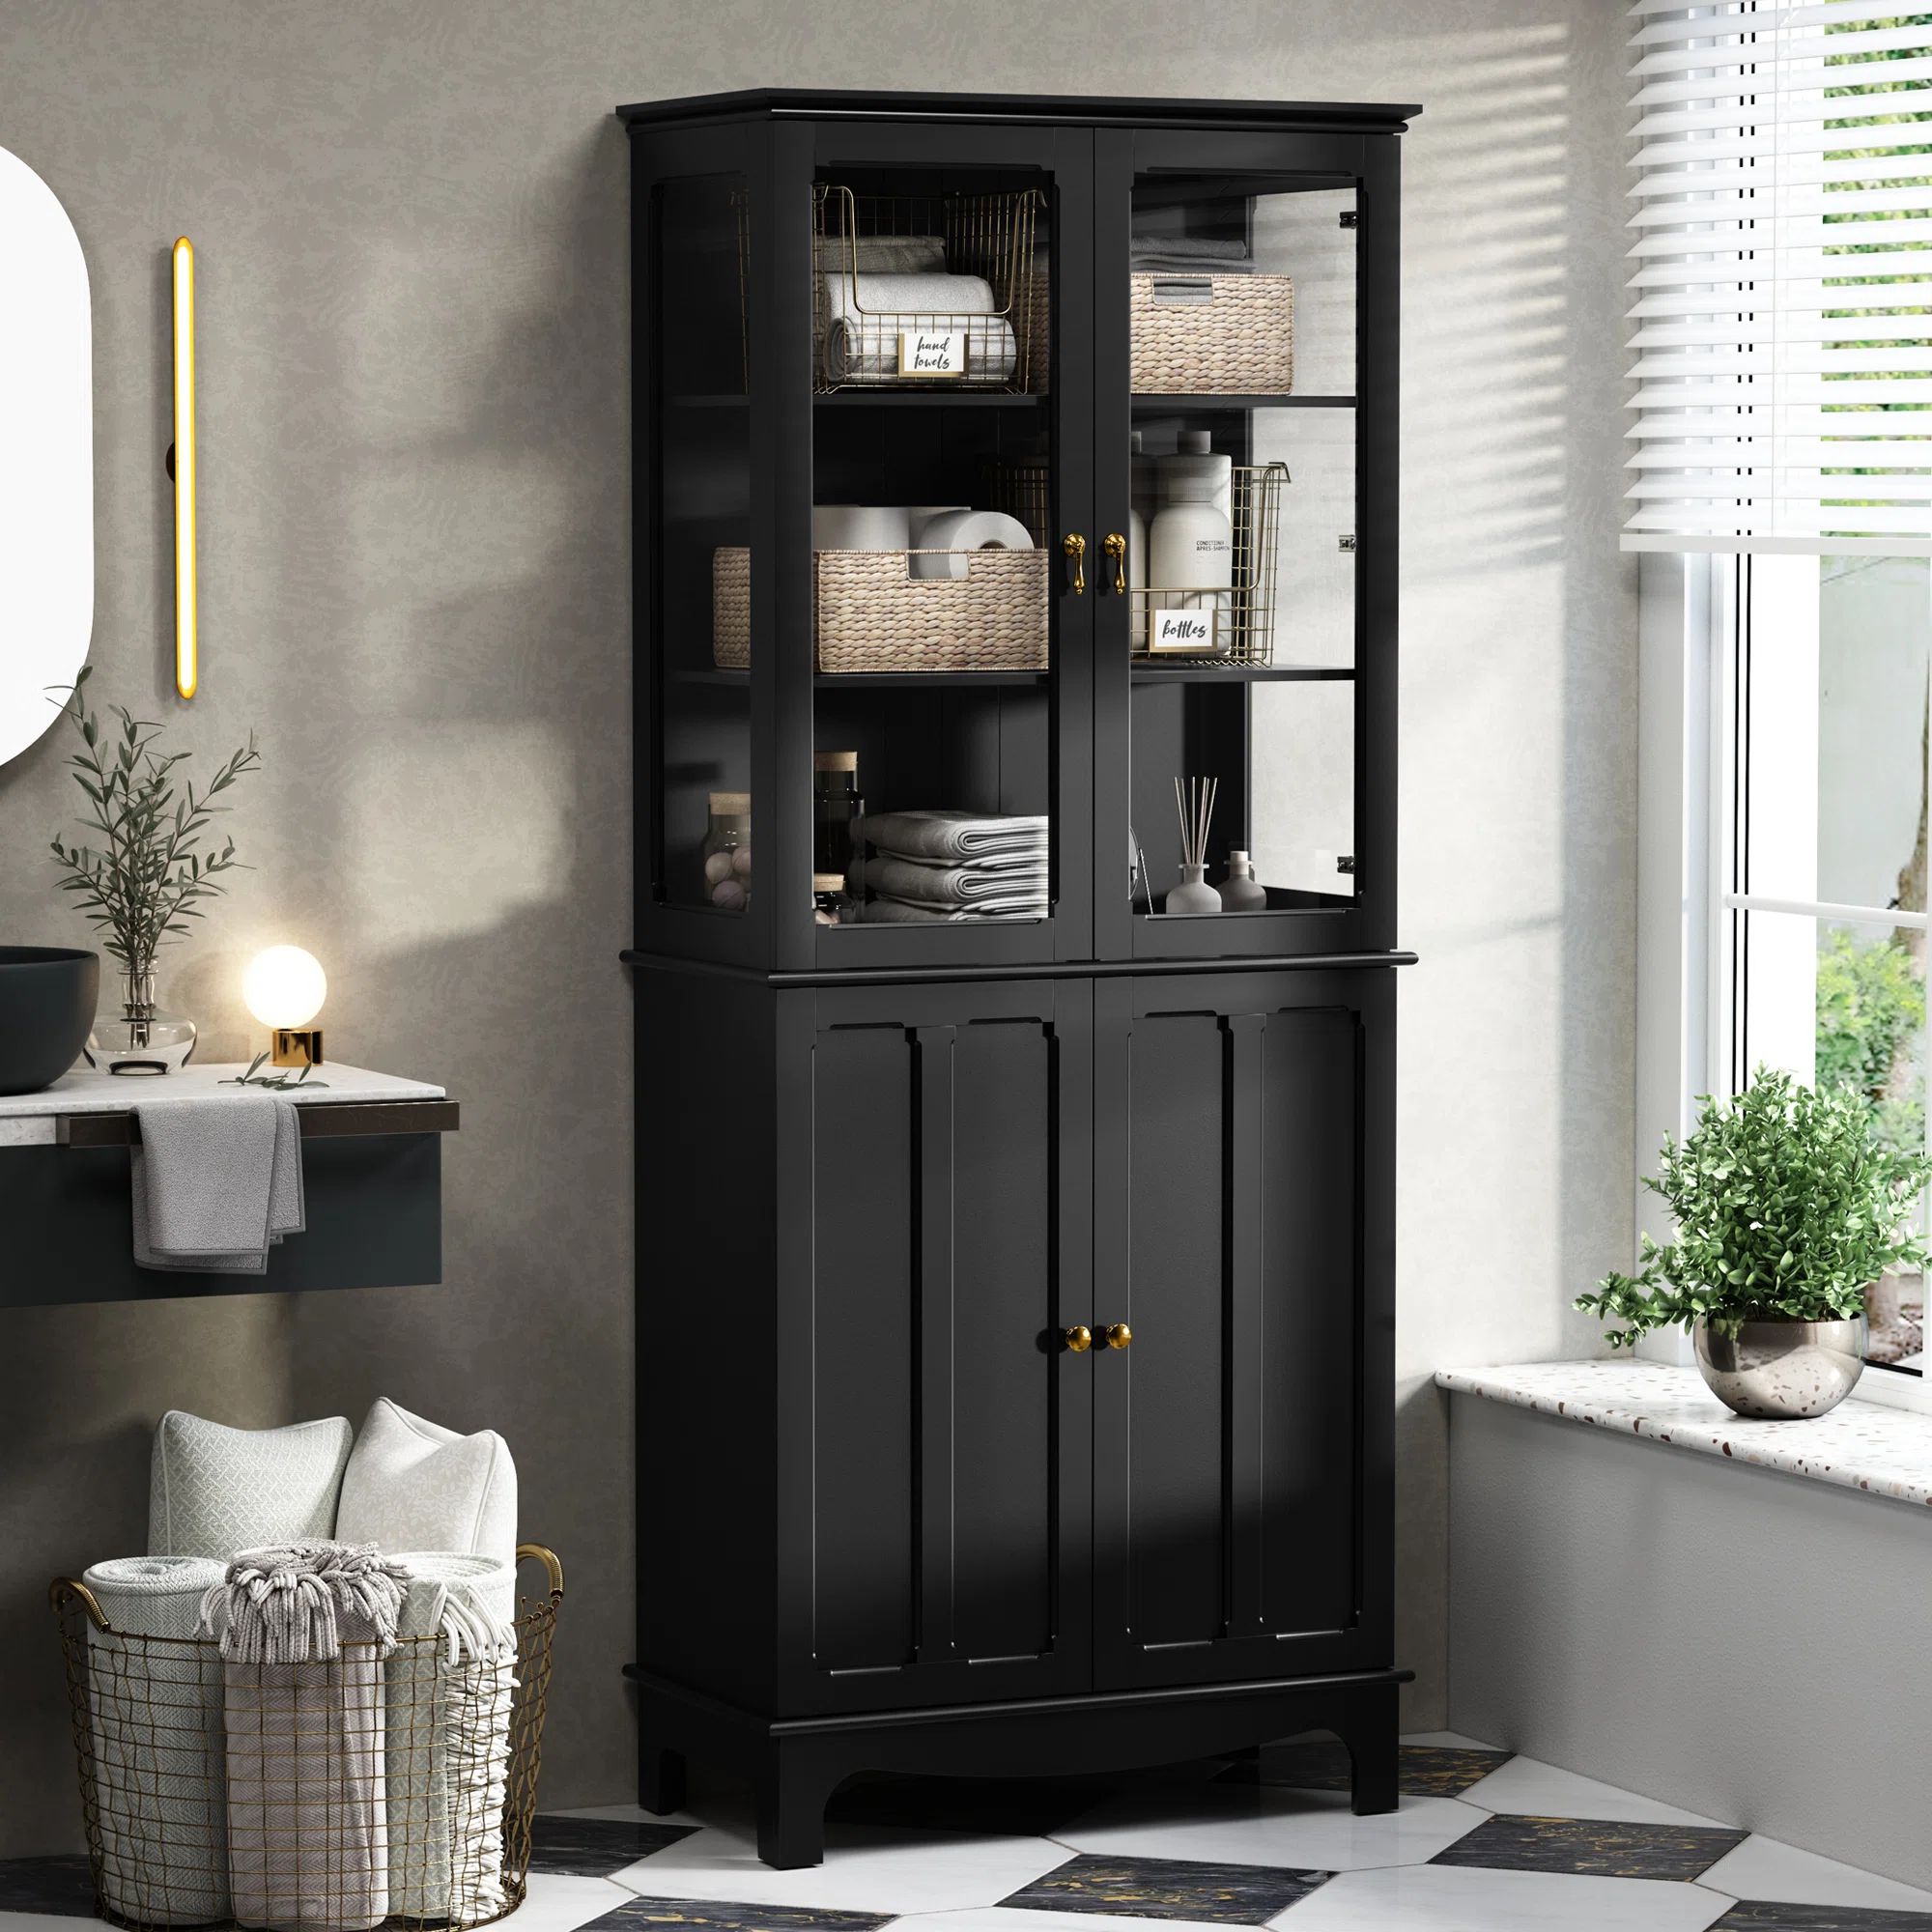 Ellerby 72" Freestanding Kitchen Pantry with Glass Doors and Adjustable Shelves | Wayfair North America